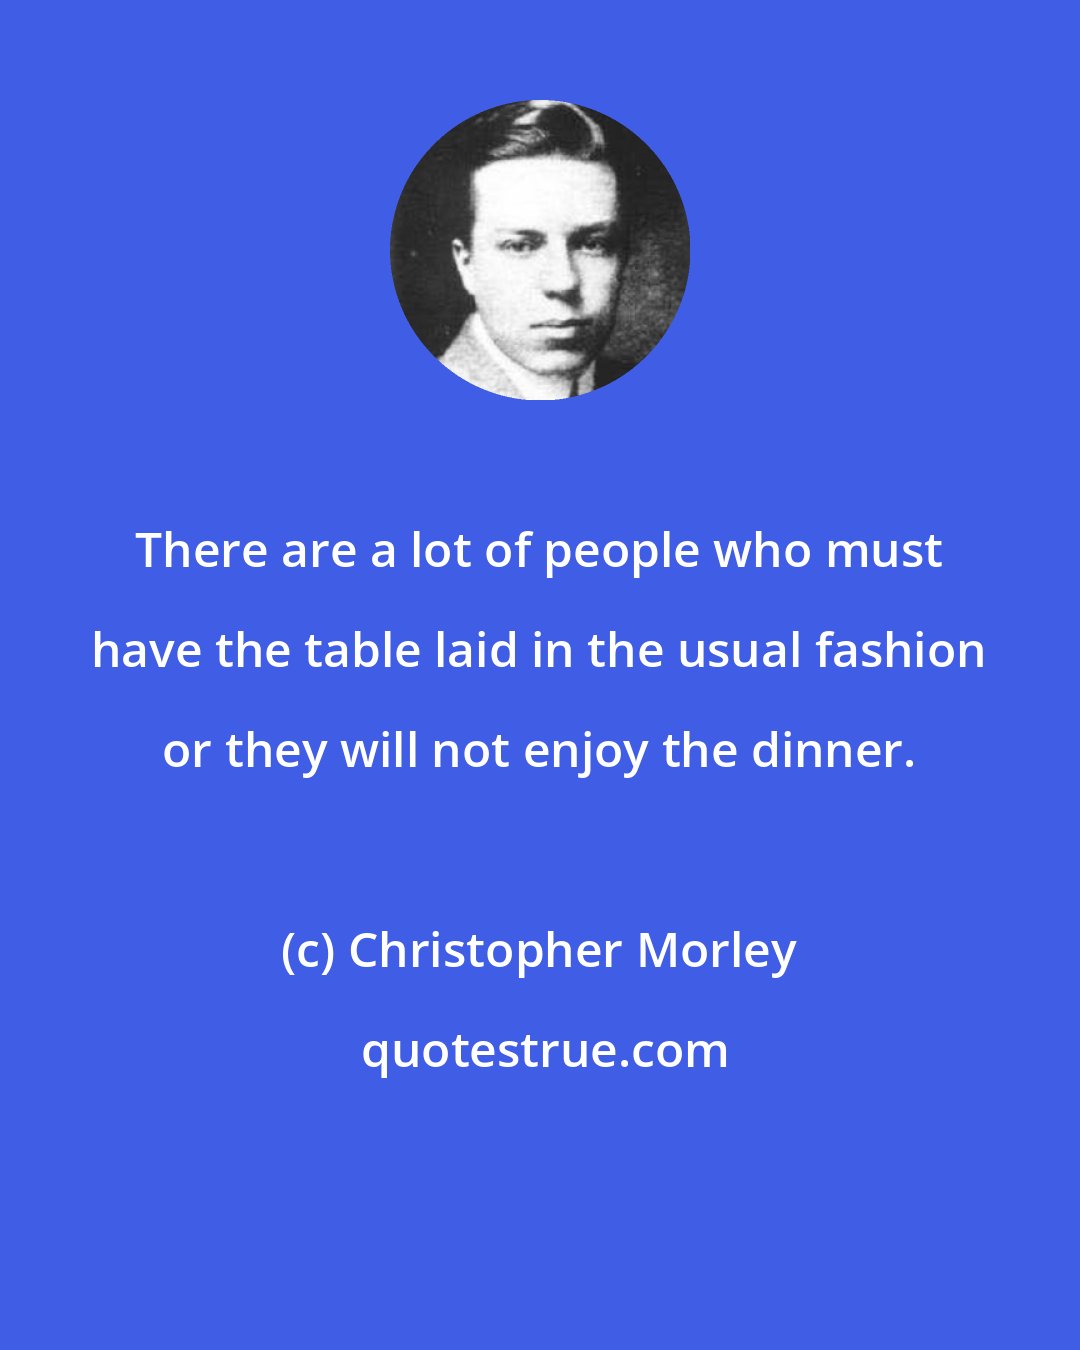 Christopher Morley: There are a lot of people who must have the table laid in the usual fashion or they will not enjoy the dinner.